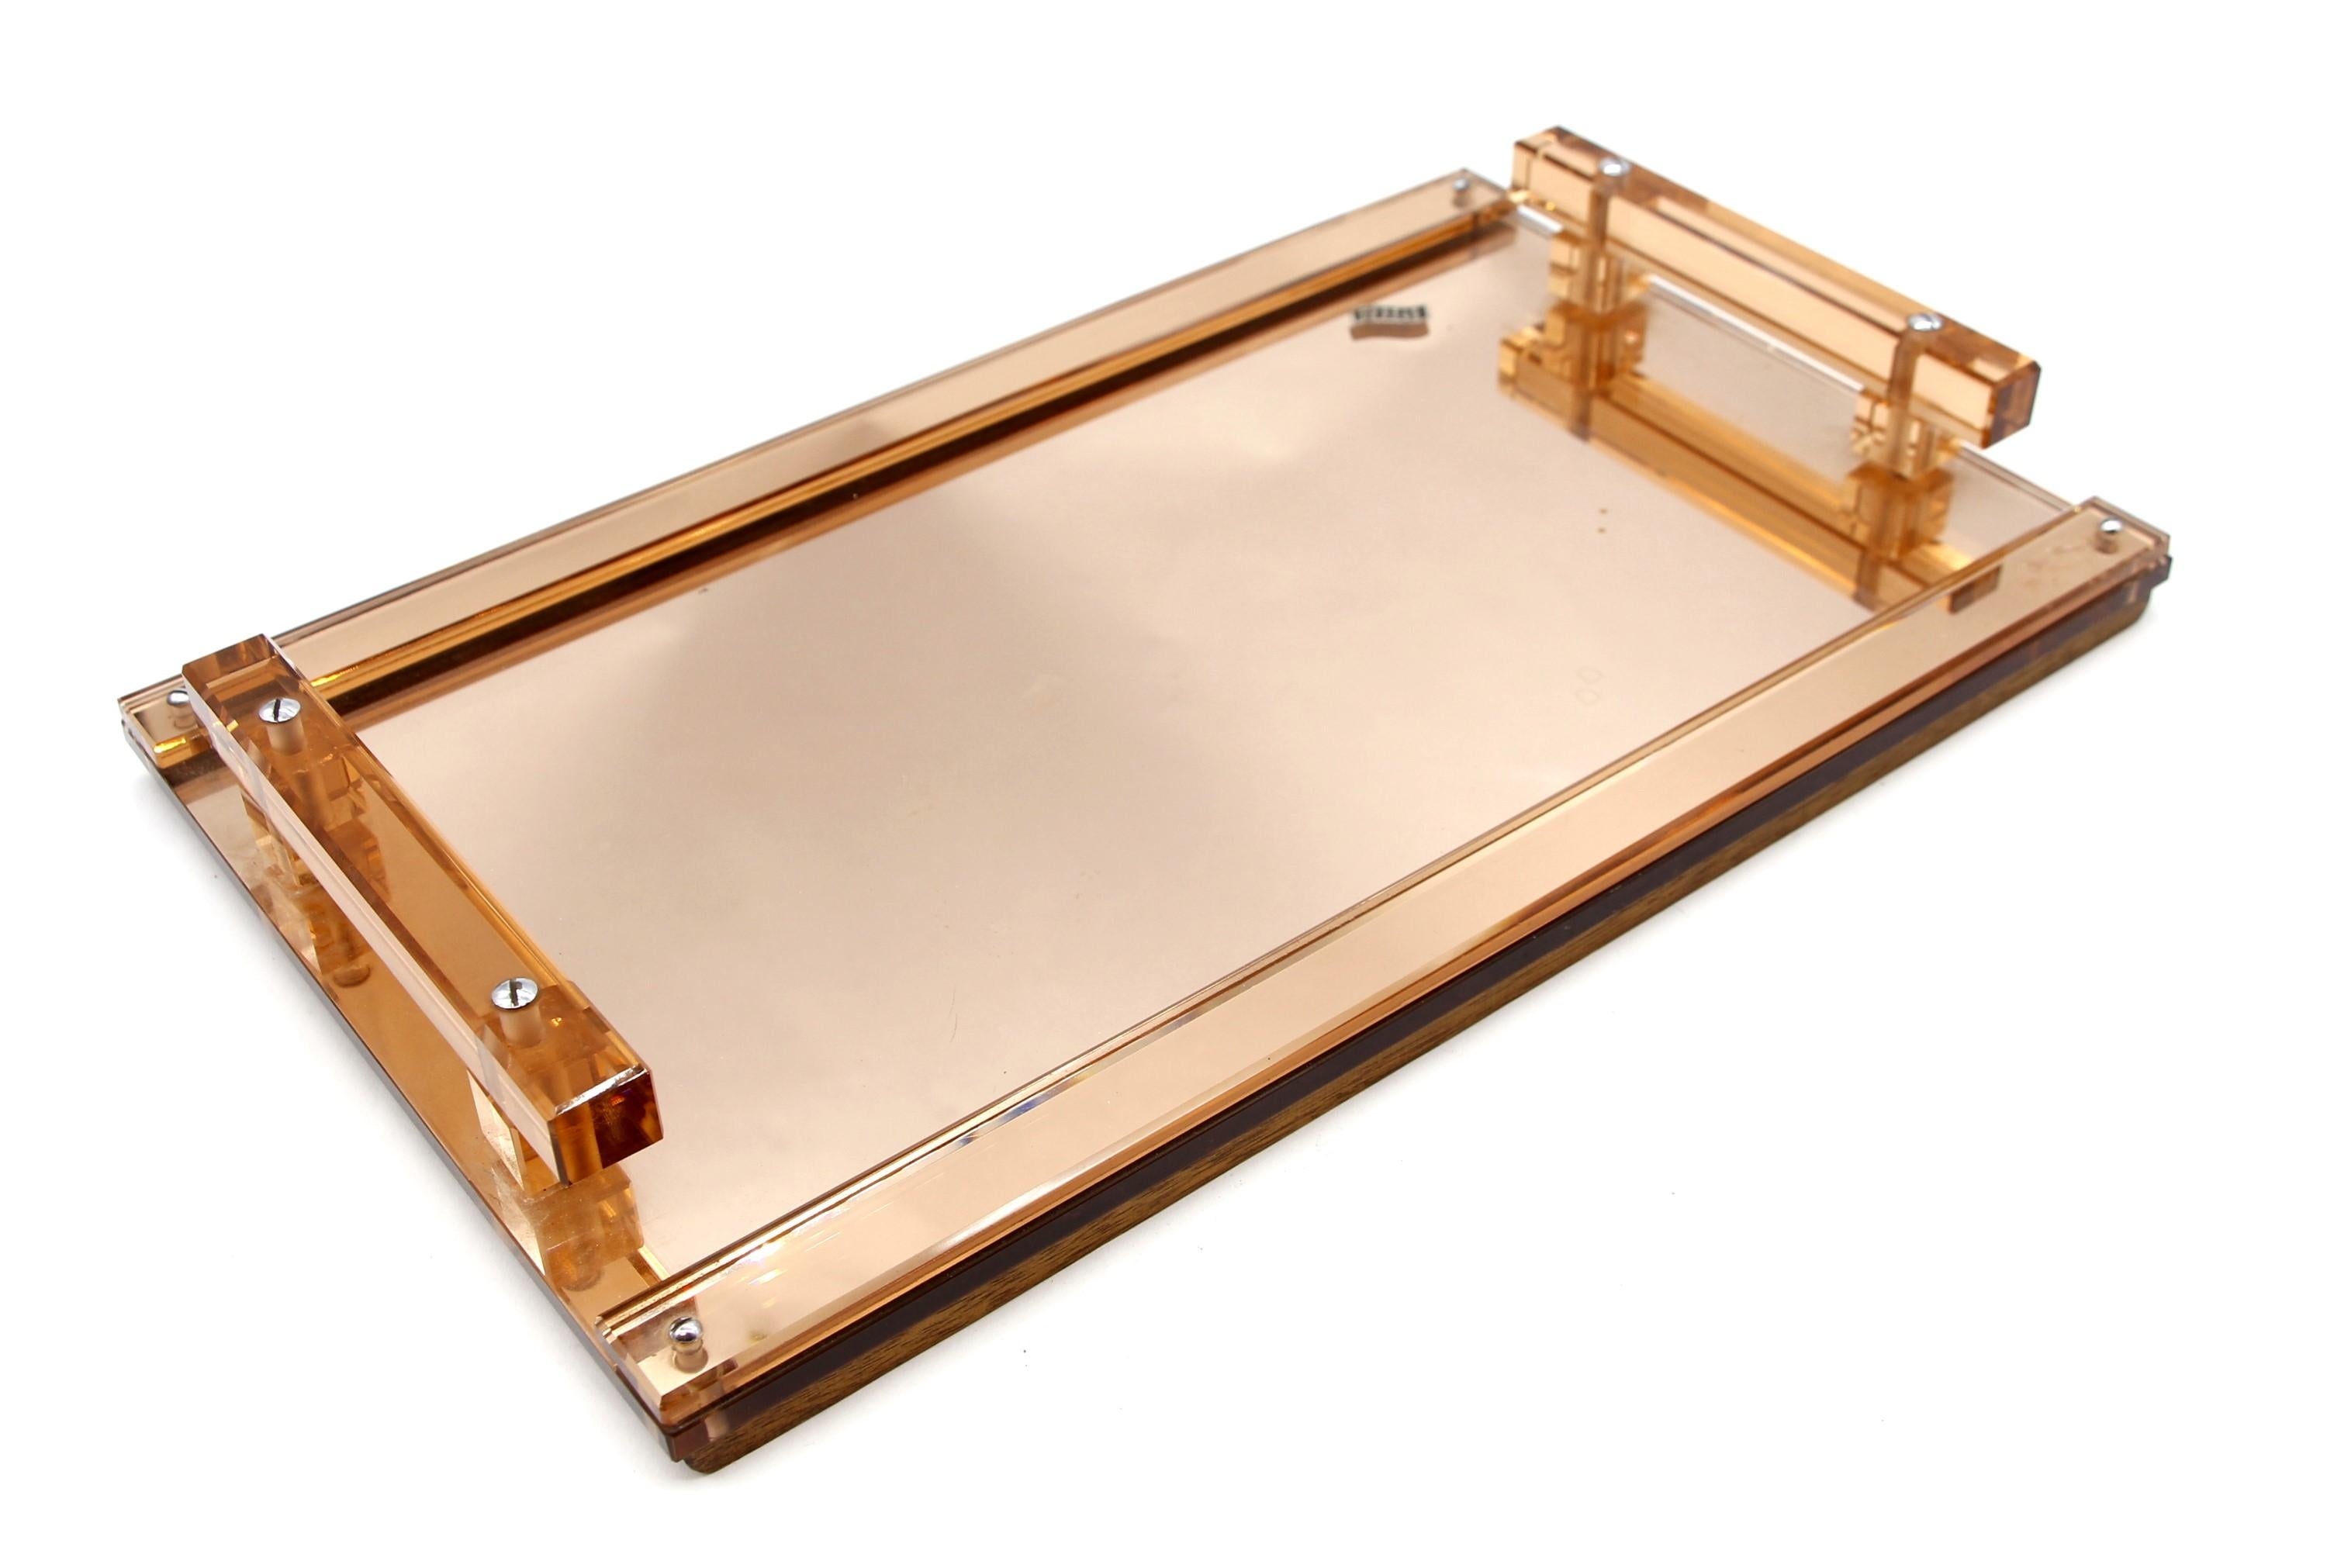 1950s Mid-Century Modern French champagne colored Lucite serving tray. Bottom of the tray is backed with mirror and two wood strips to provide stability. Original tag says 